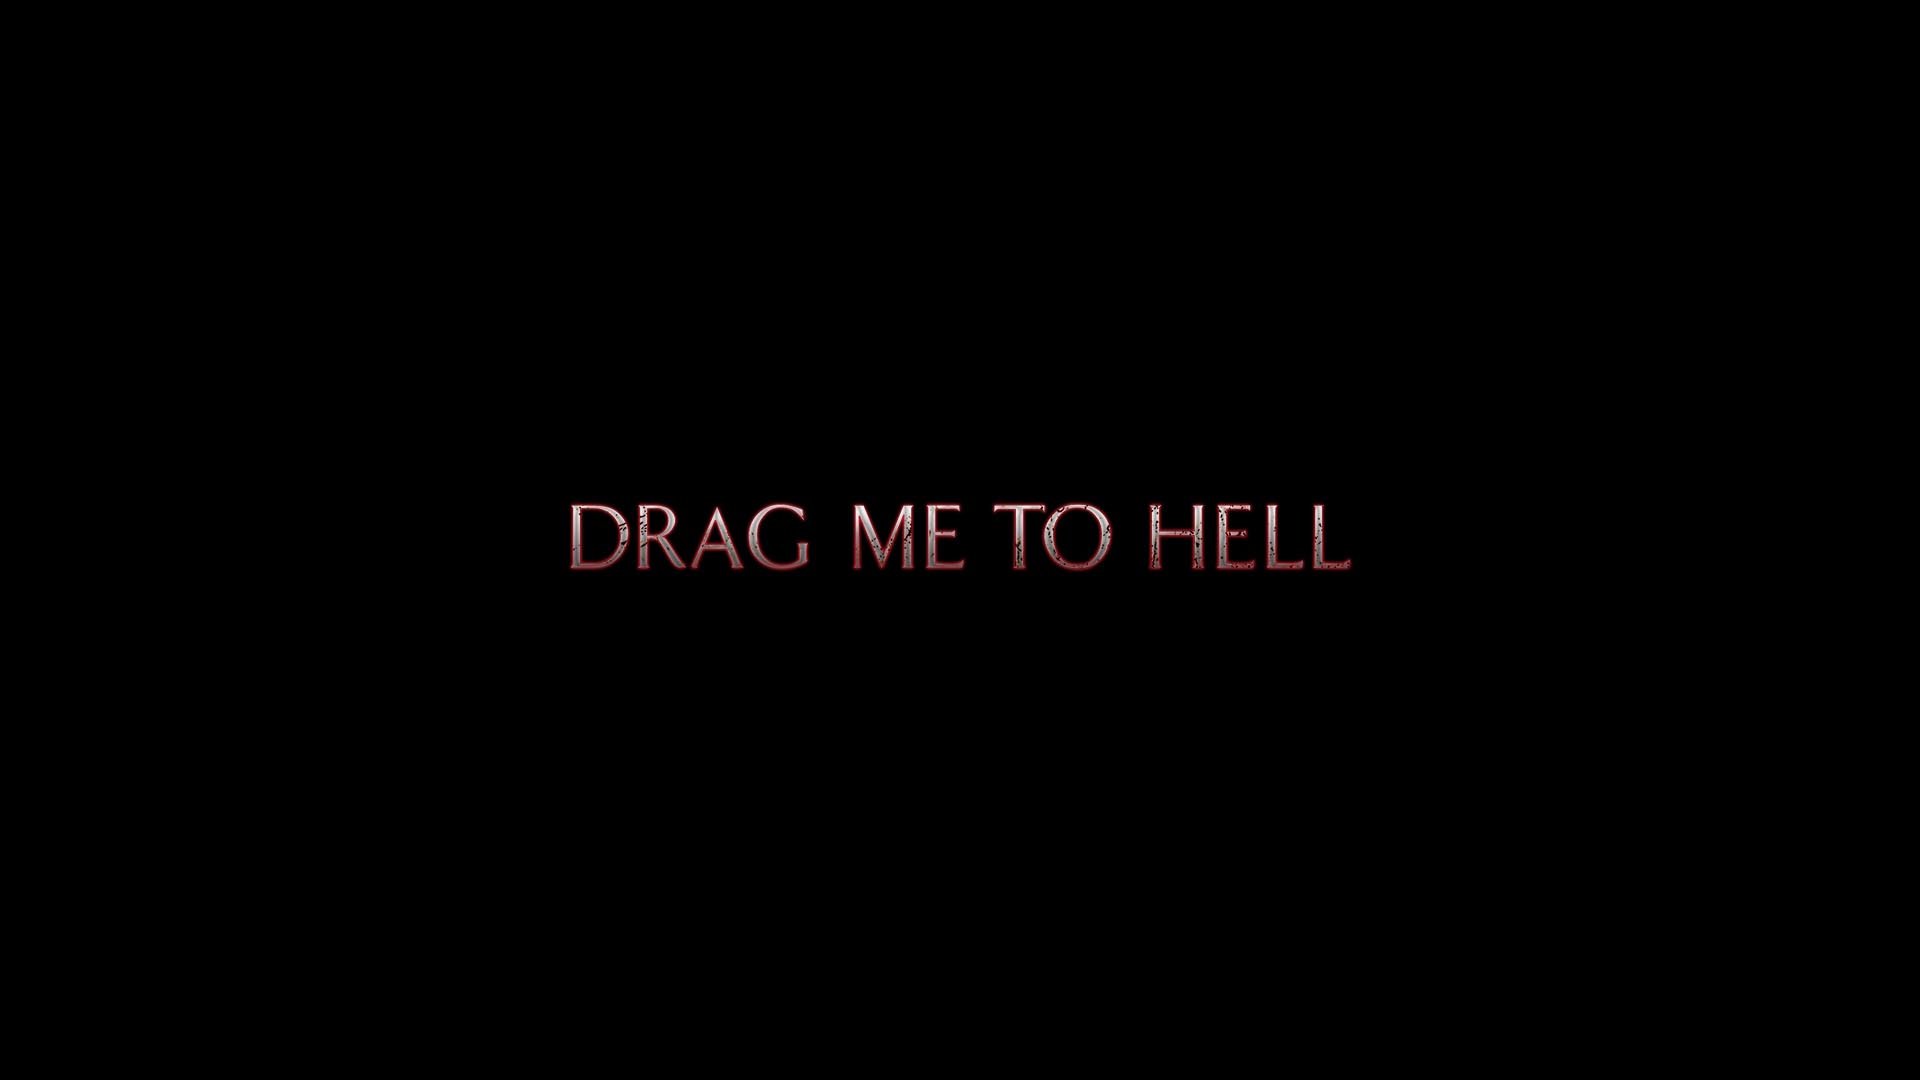 Movie Drag Me To Hell Wallpaper:1920x1080